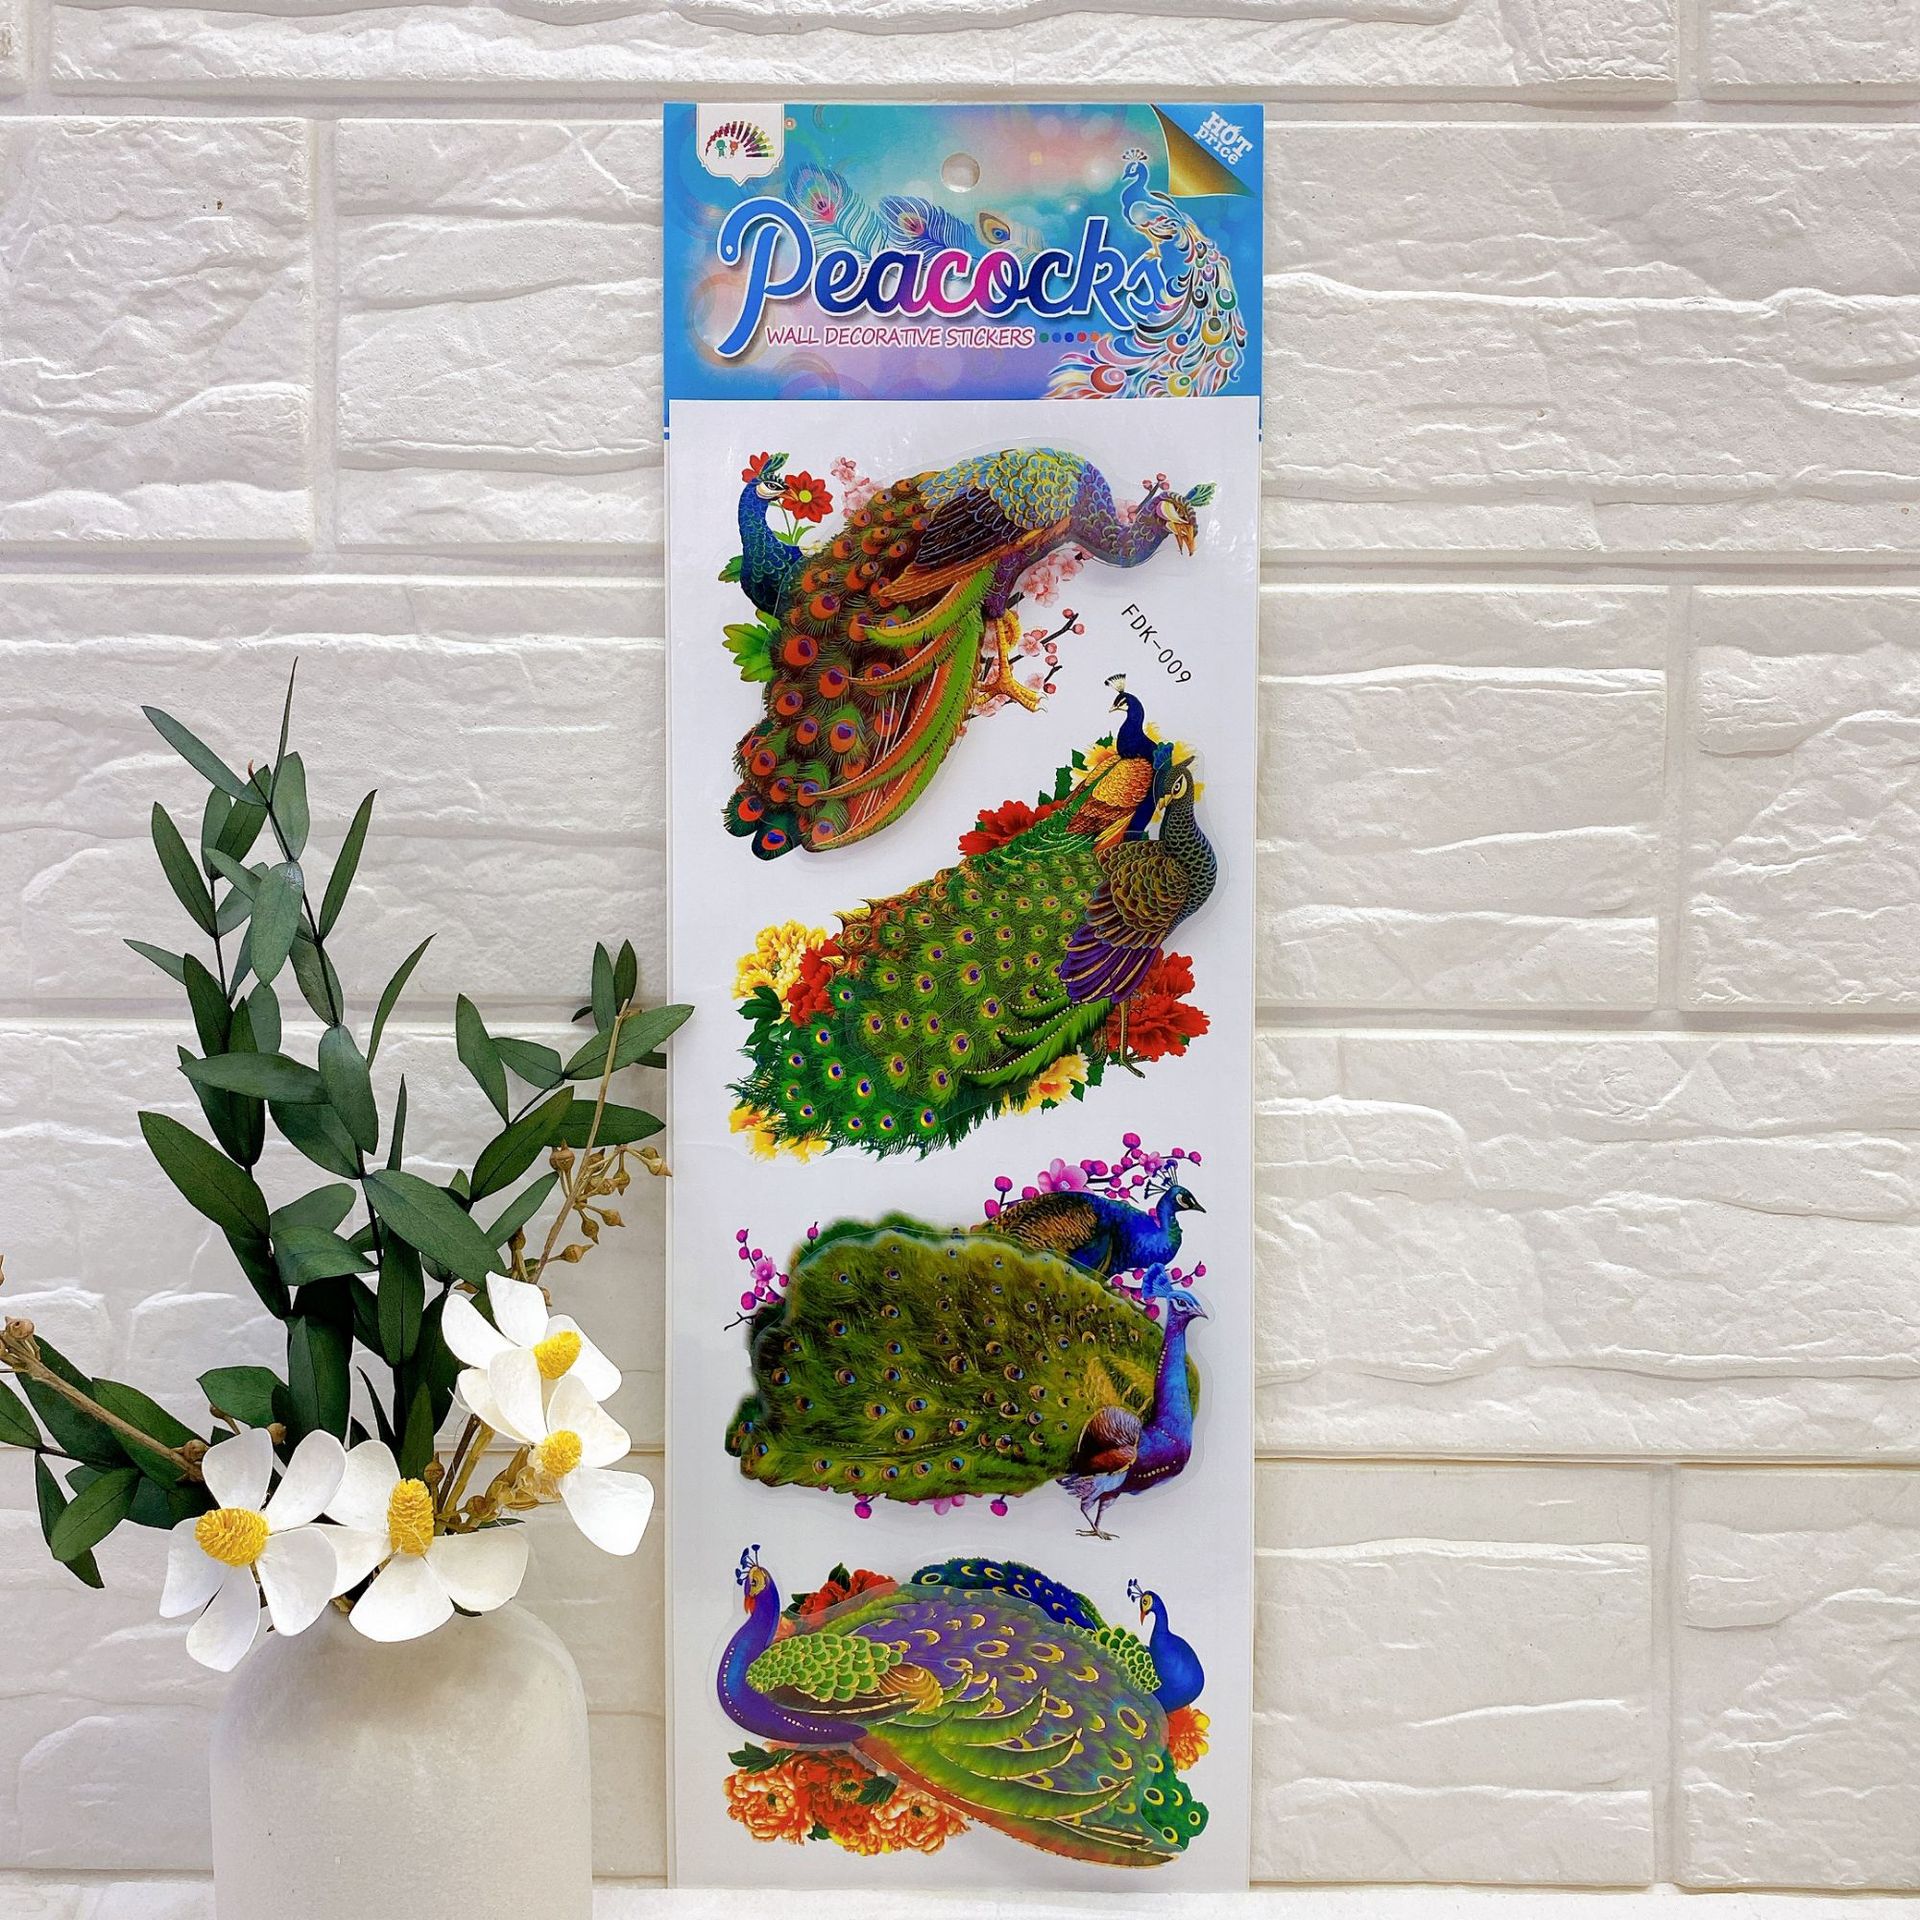 Gilding Four Peacocks Three-Dimensional Stickers Living Room Bedroom Wall Home Decoration Wall Stickers 3D Three-Dimensional Handmade Layer Wall